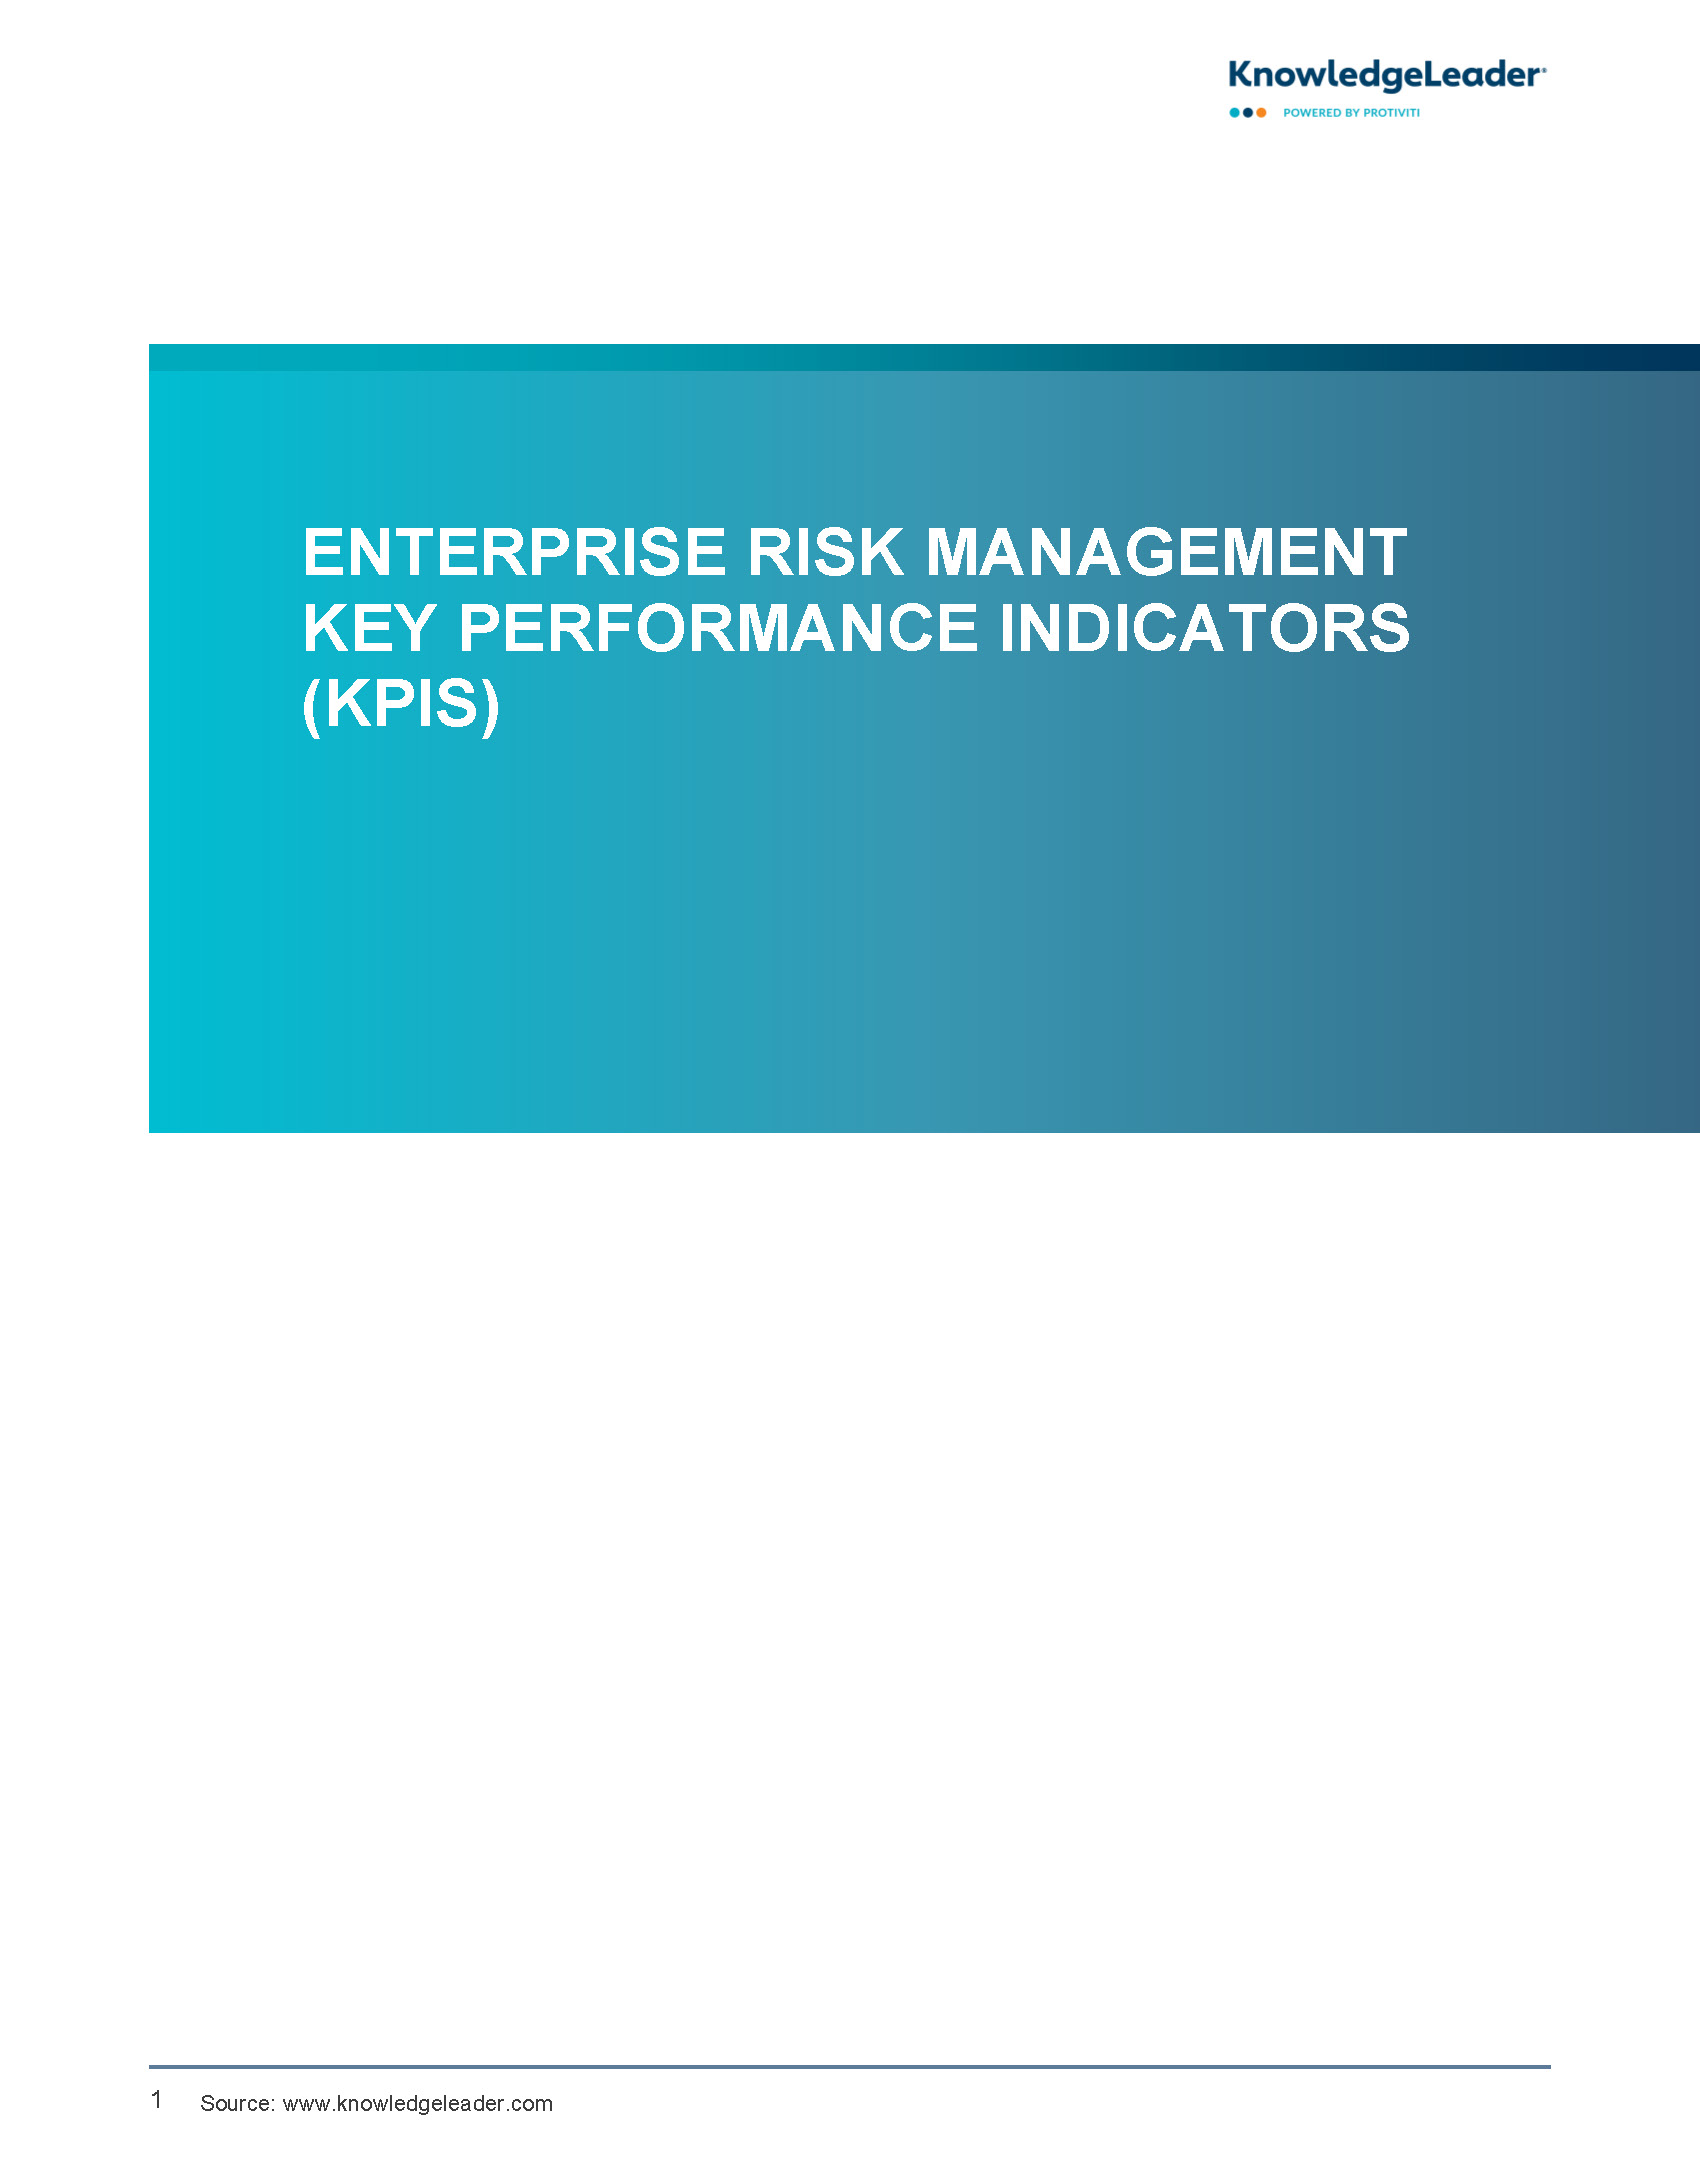 Screenshot of the first page of Enterprise Risk Management Key Performance Indicators (KPIs)